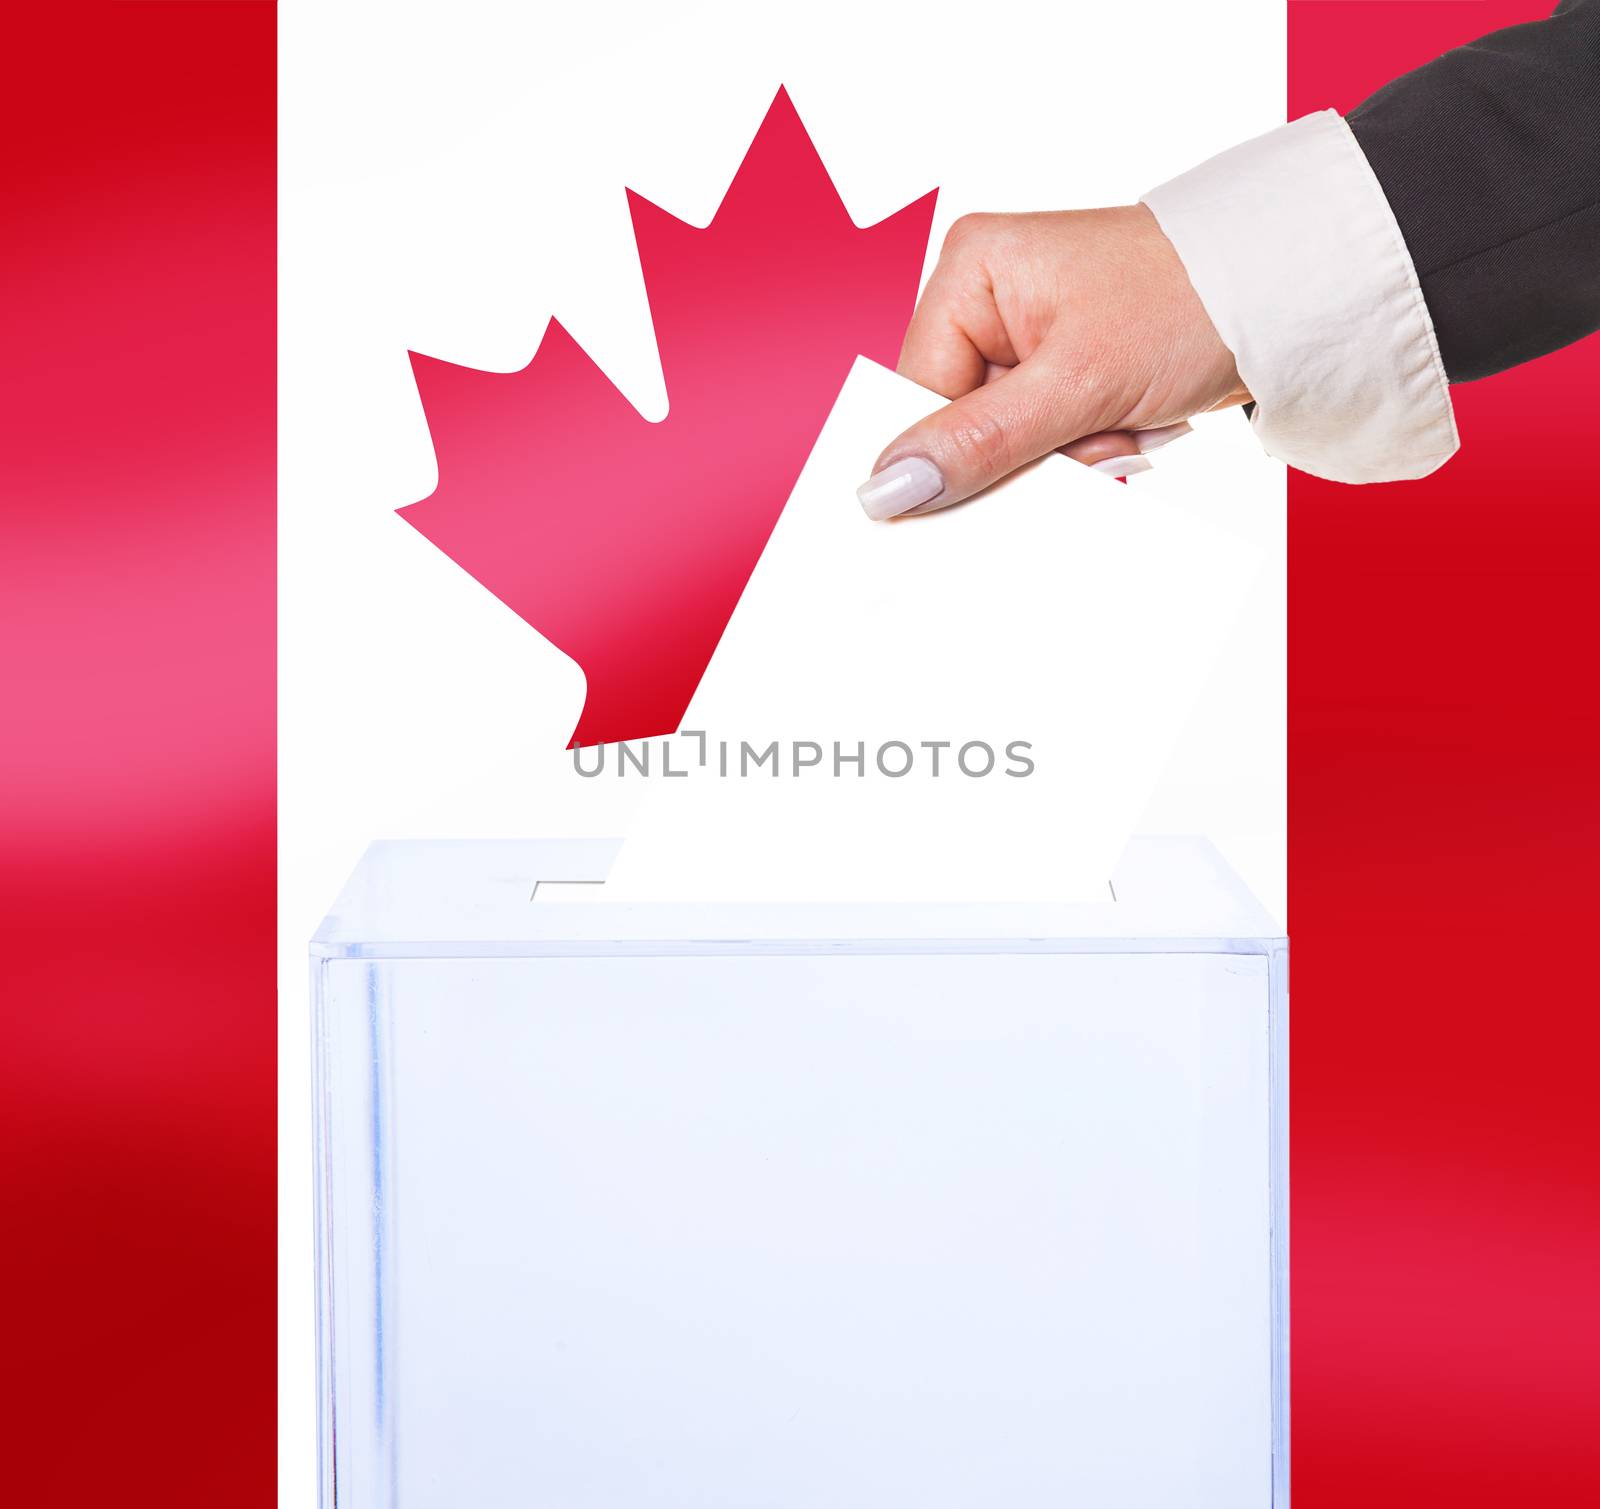 electoral vote by ballot, under the Canada flag